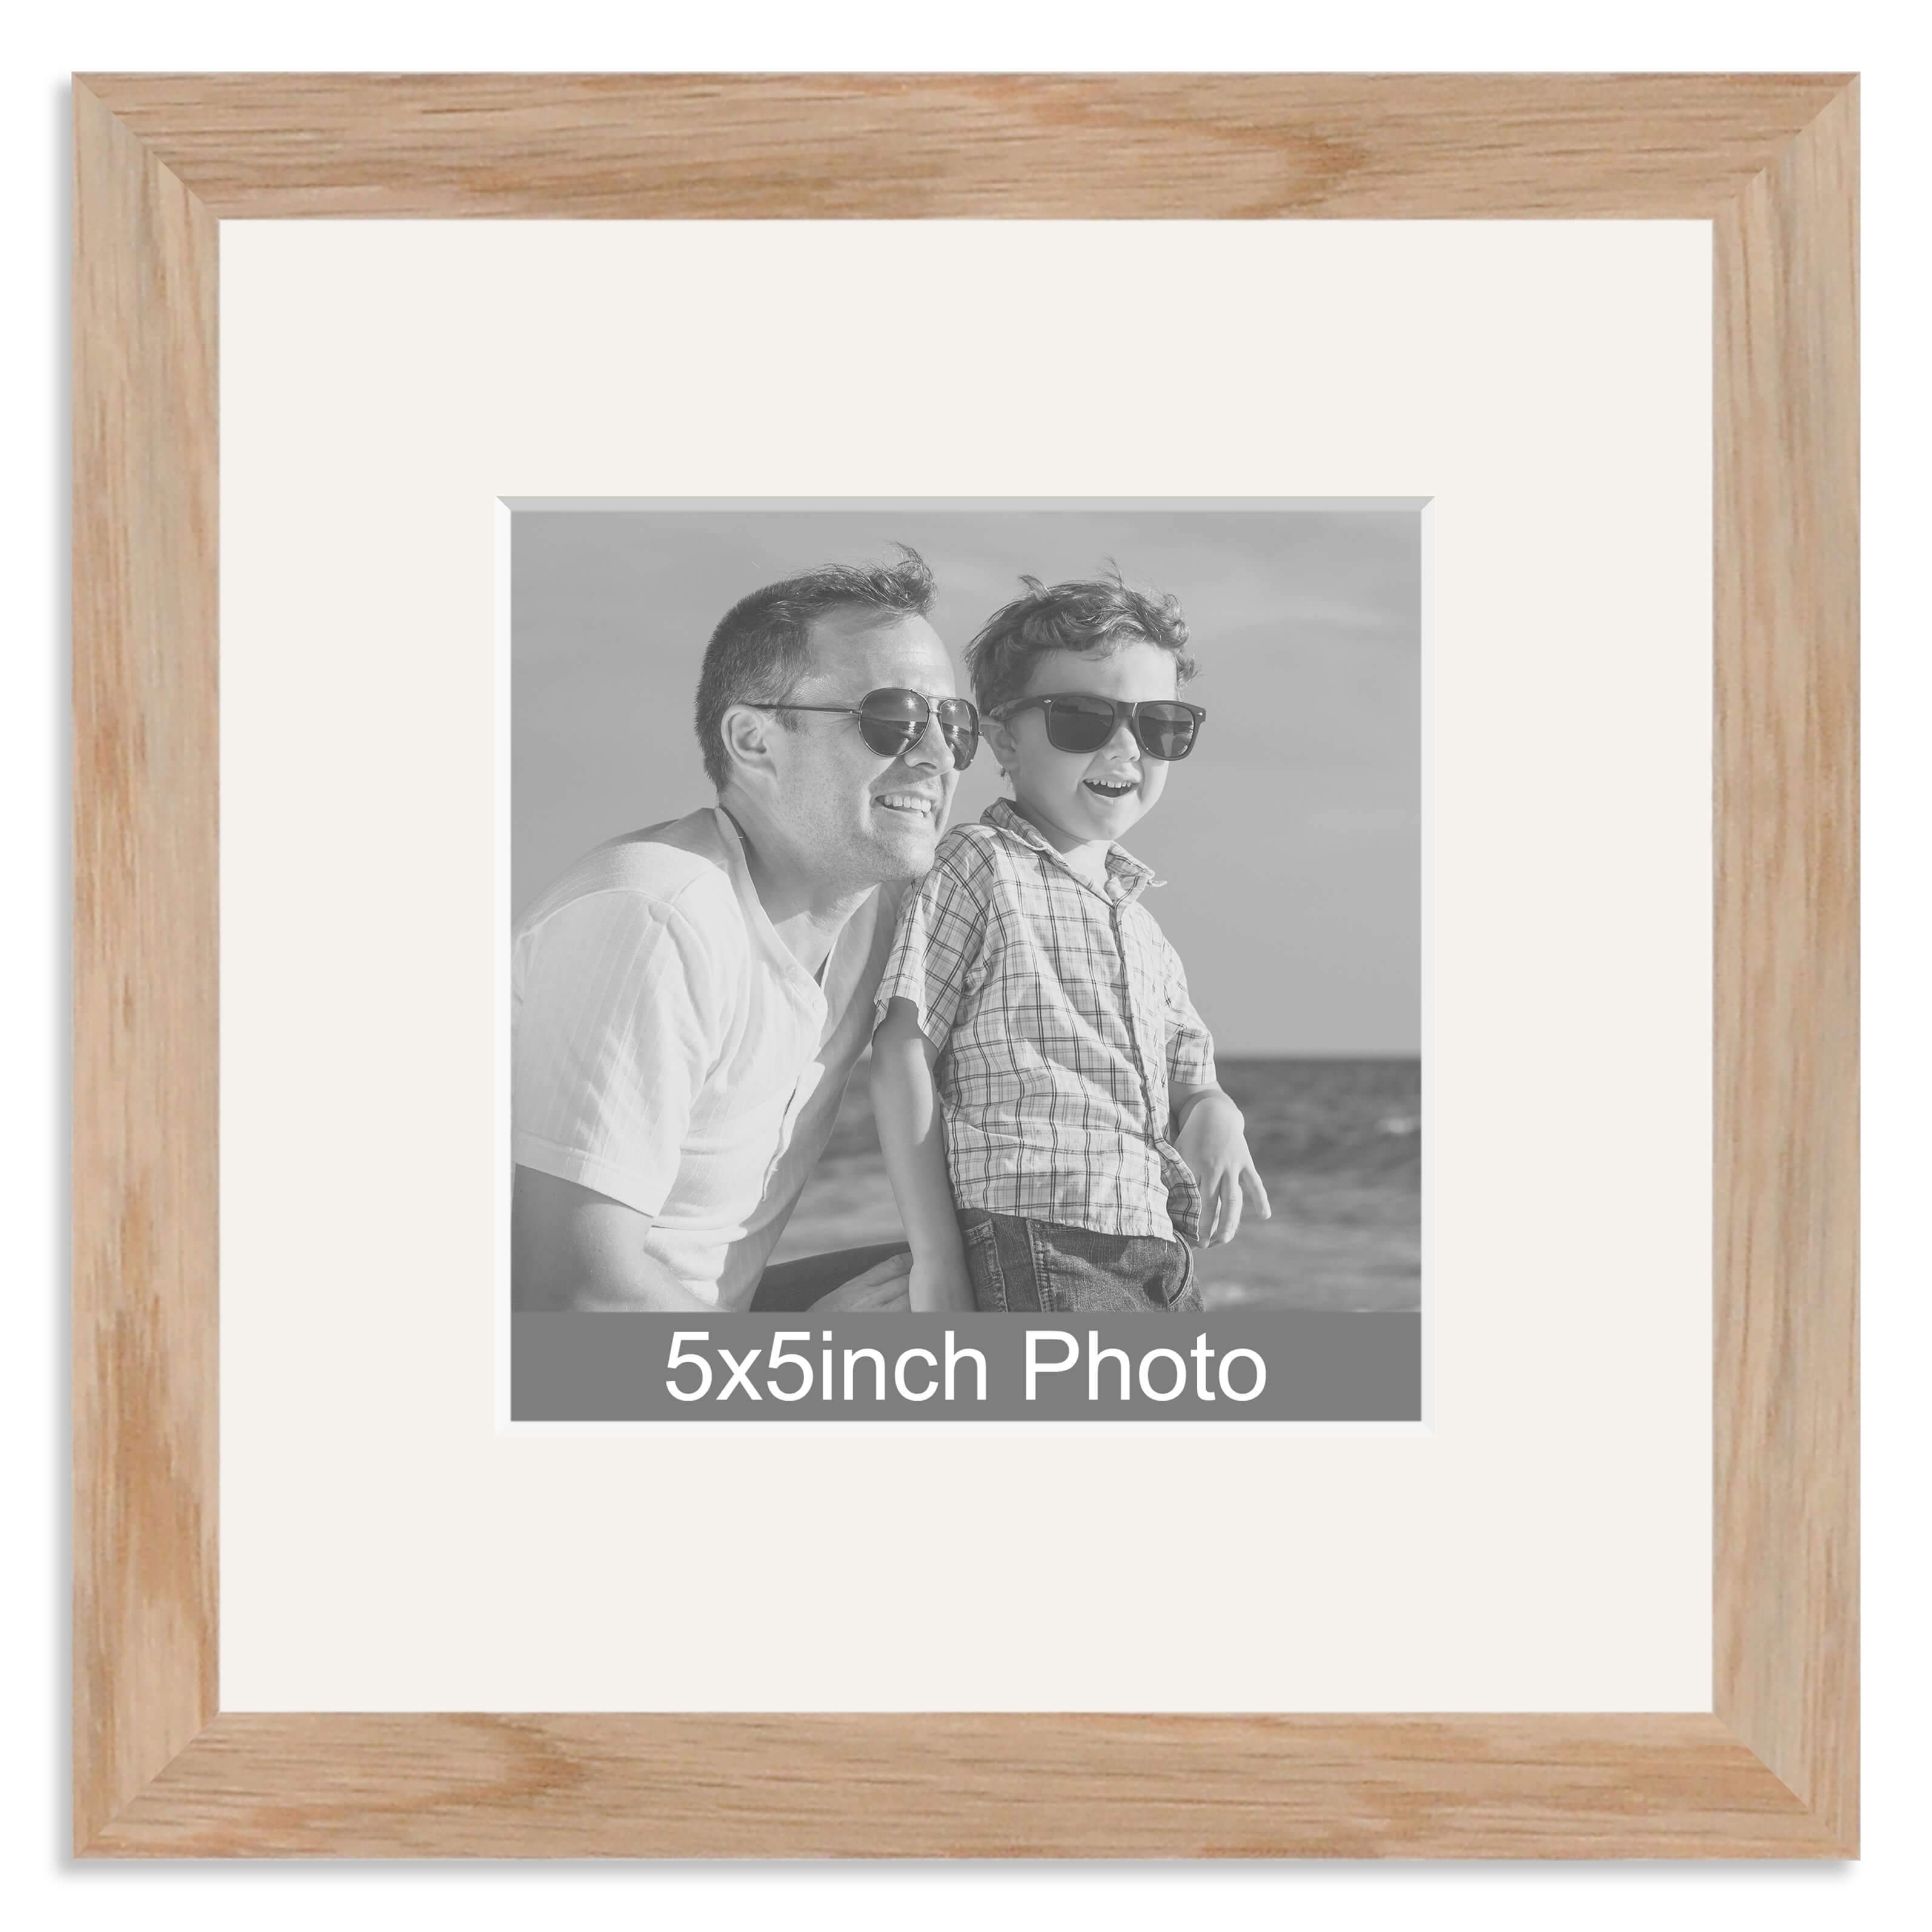 Solid Oak Photo Frame with mount for a 5x5in Photo – Photo uploaded below